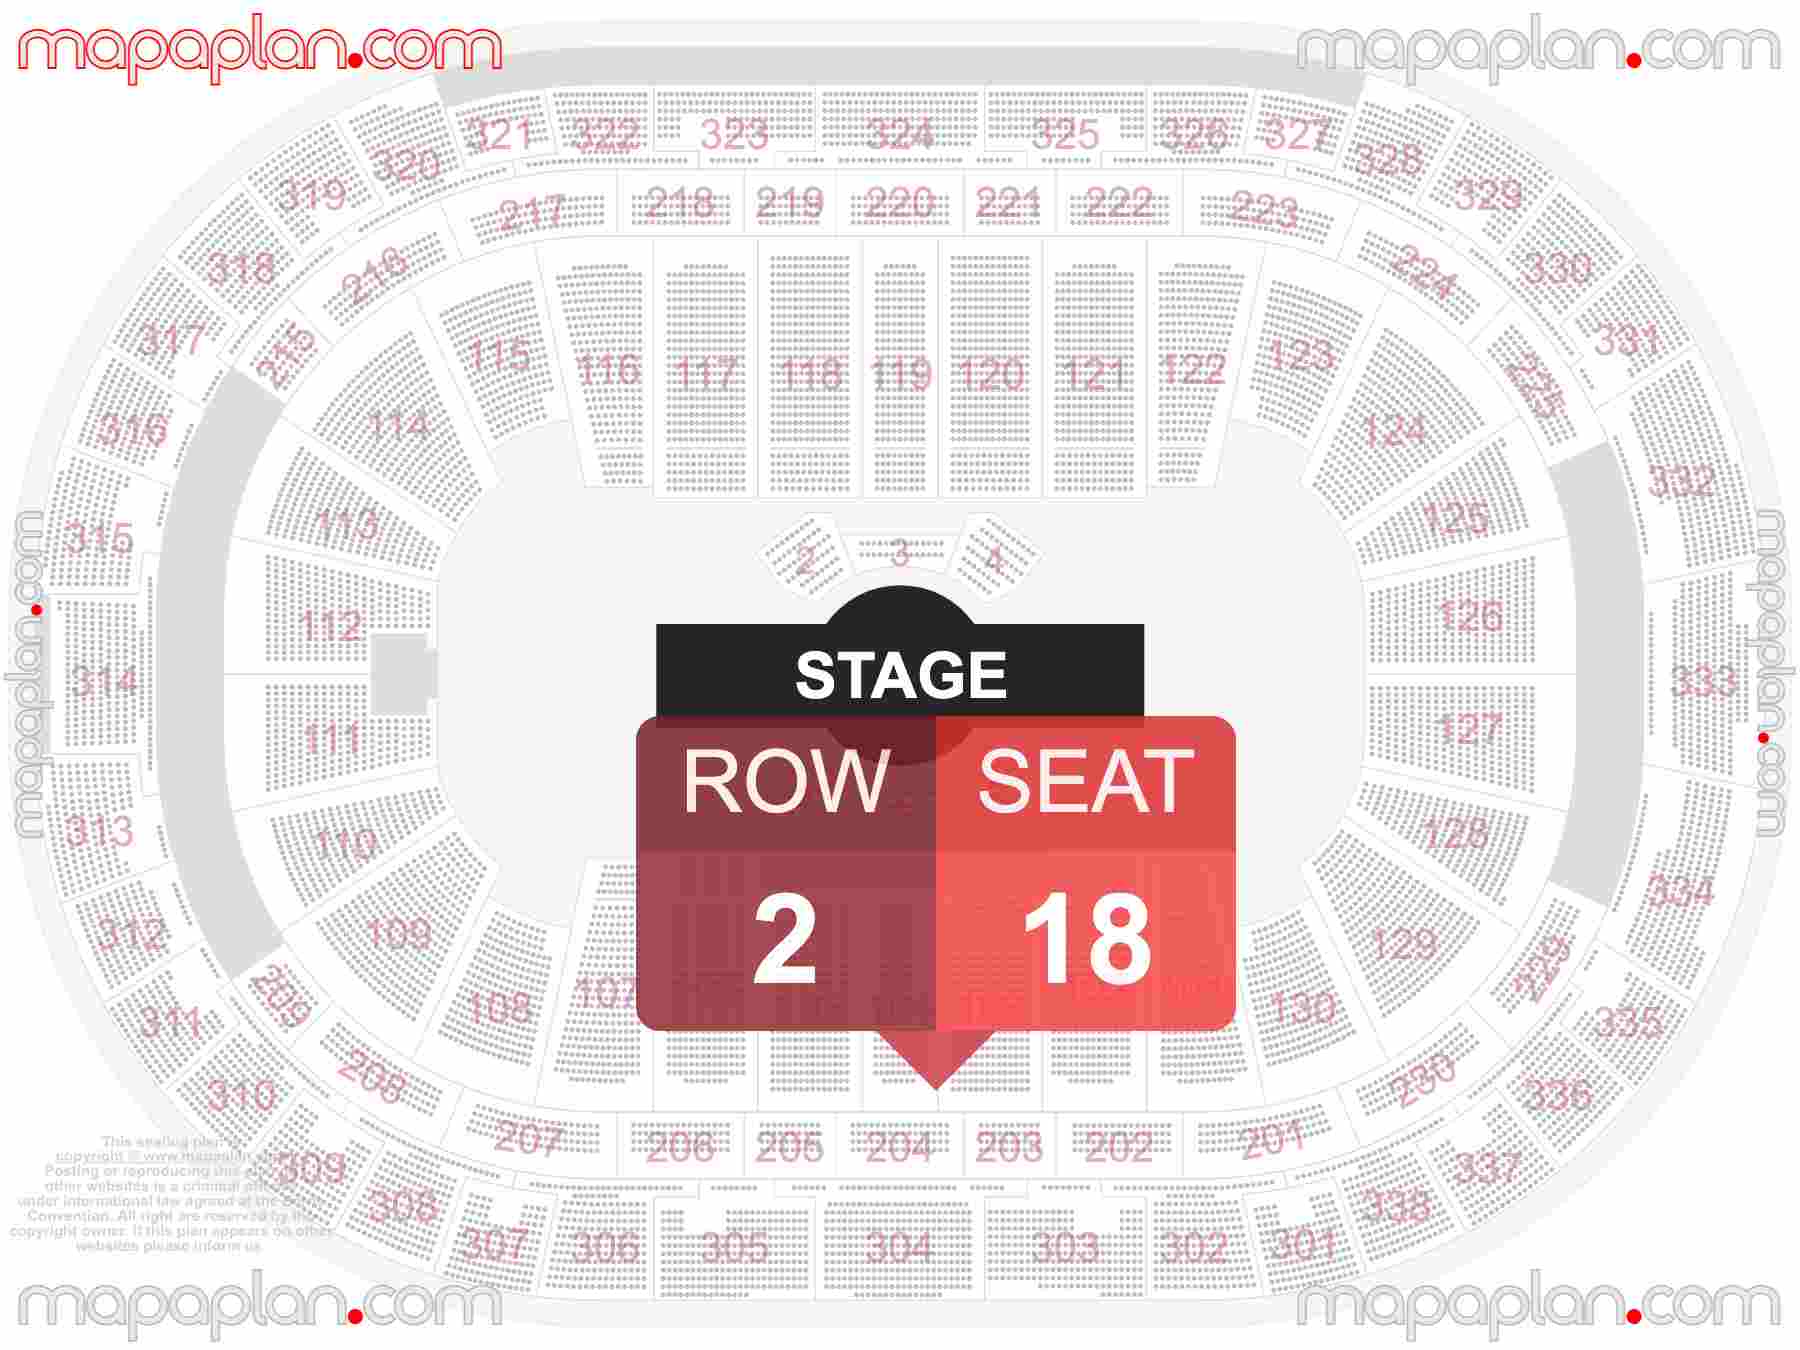 Raleigh PNC Arena seating chart Cirque du Soleil circus precise seat finder - Explore seating chart with exact section, seat and row numbers